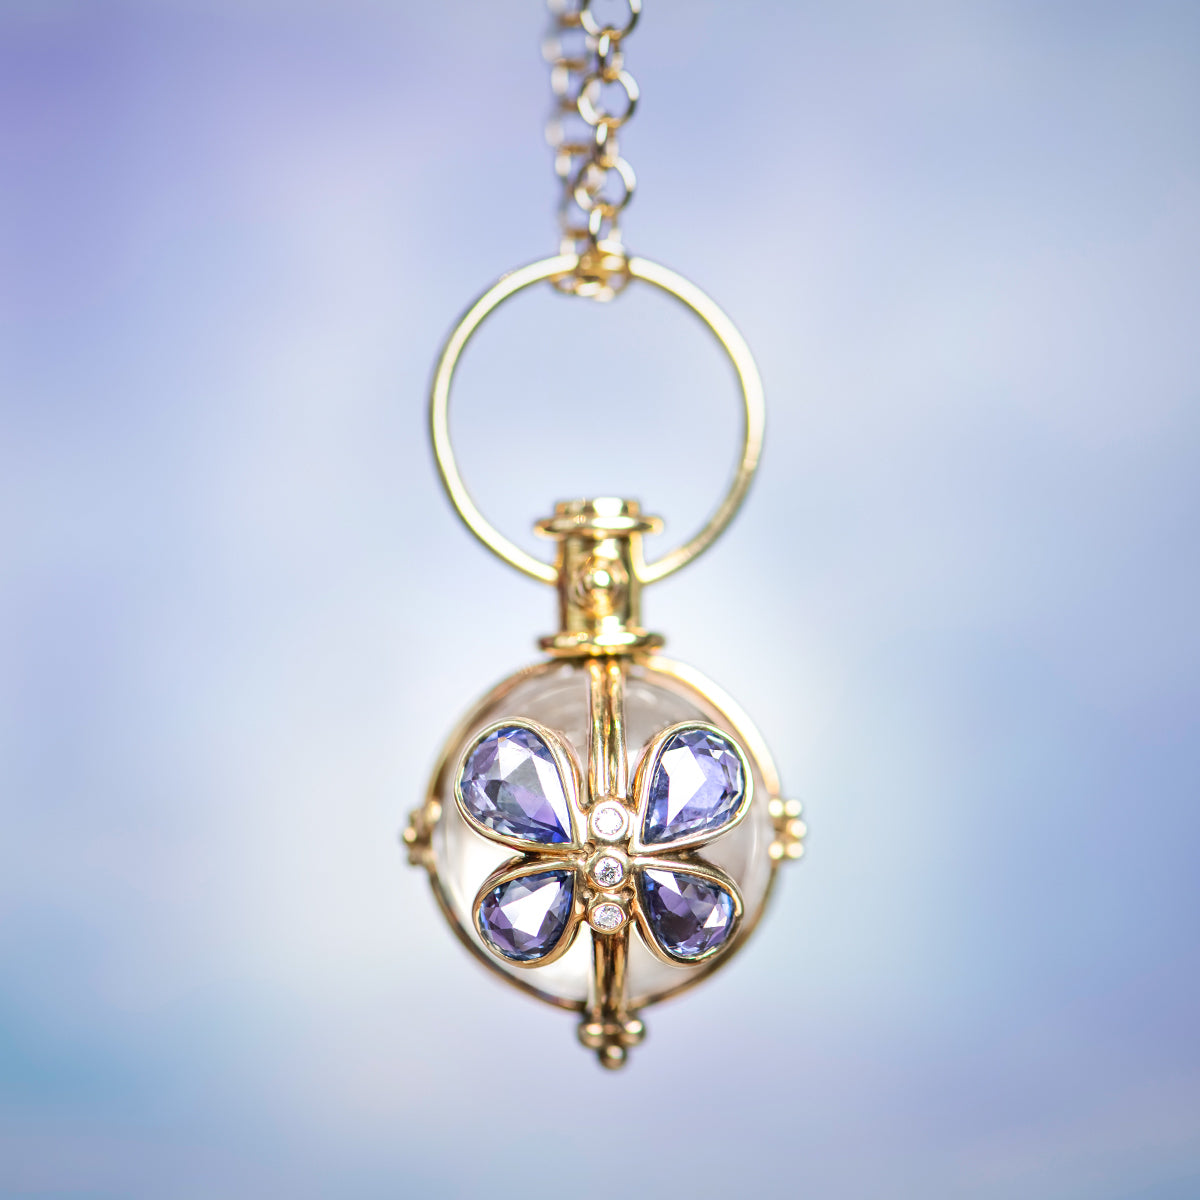 Temple St. Clair Rock Crystal Heart Pendant in 18K Yellow Gold